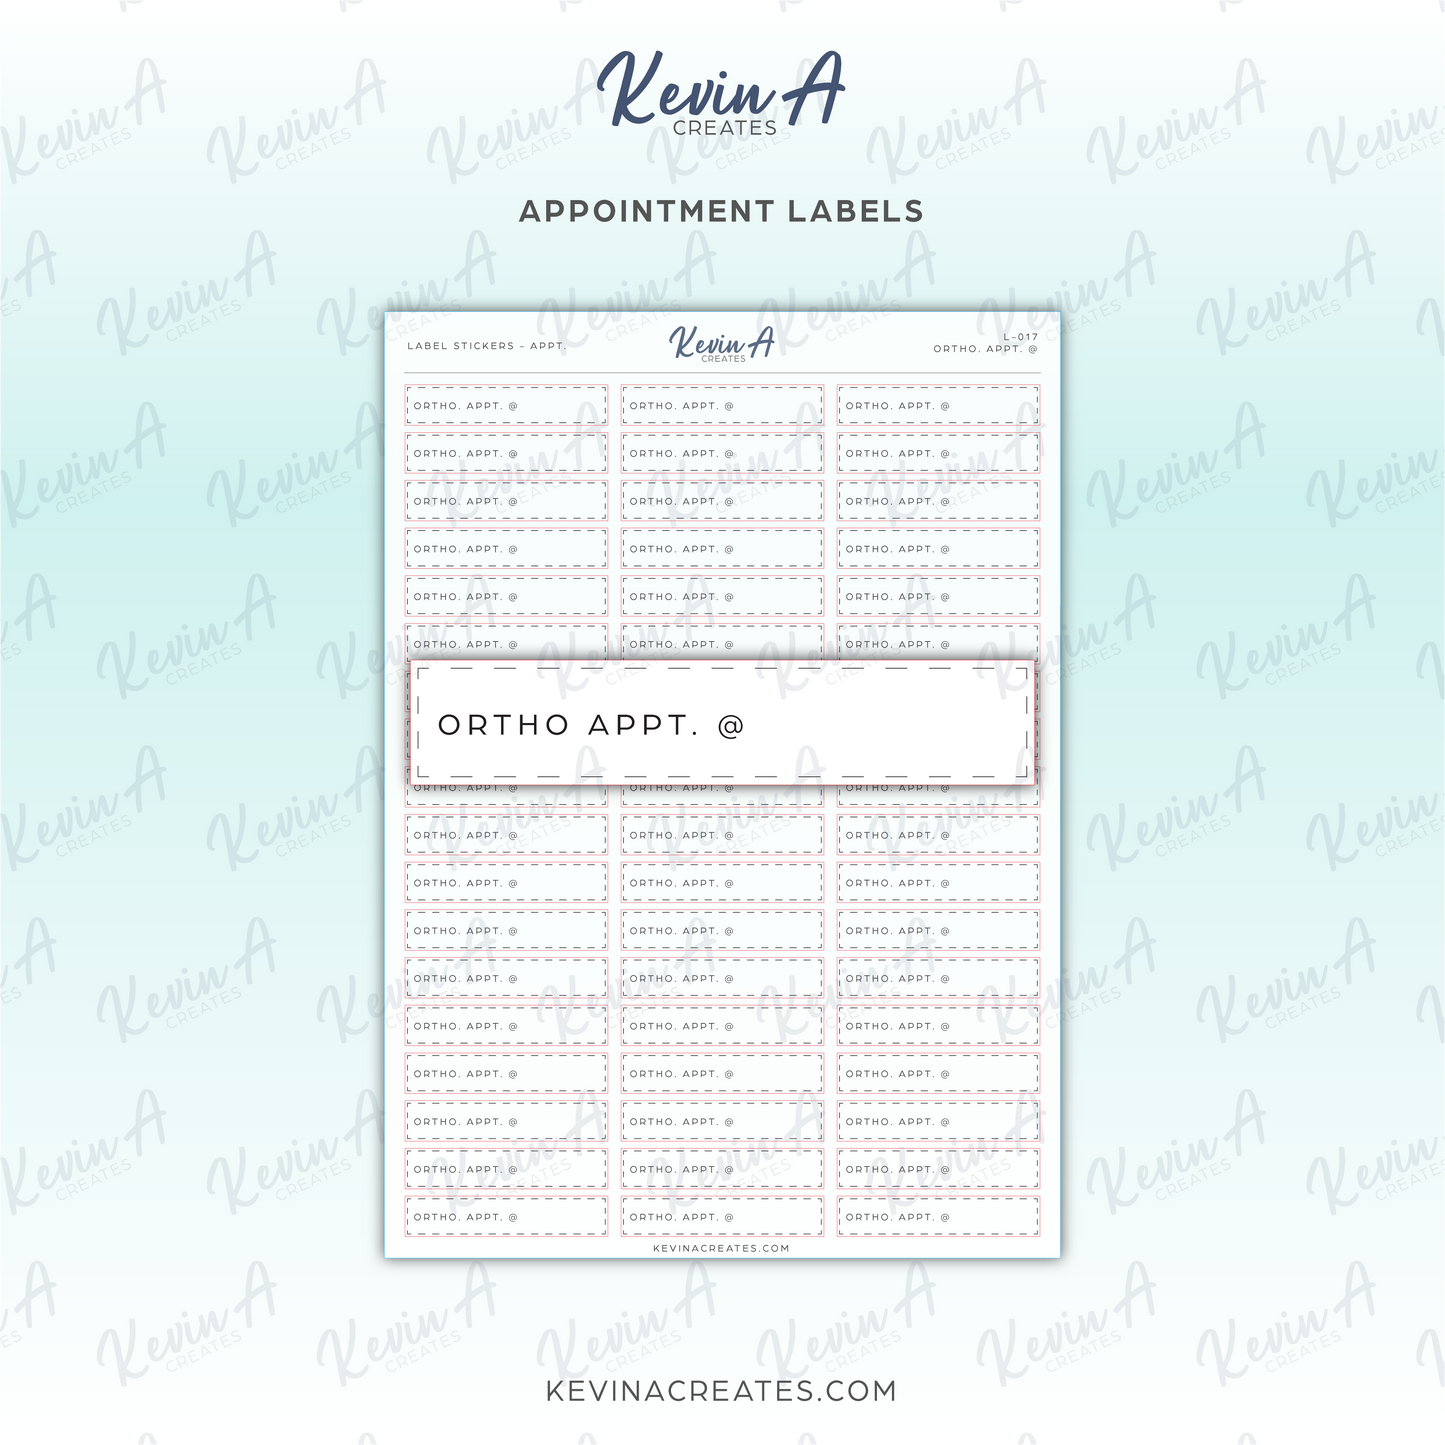 L-017 - Appointment Label Sticker - ORTHODONTIST APPOINTMENT